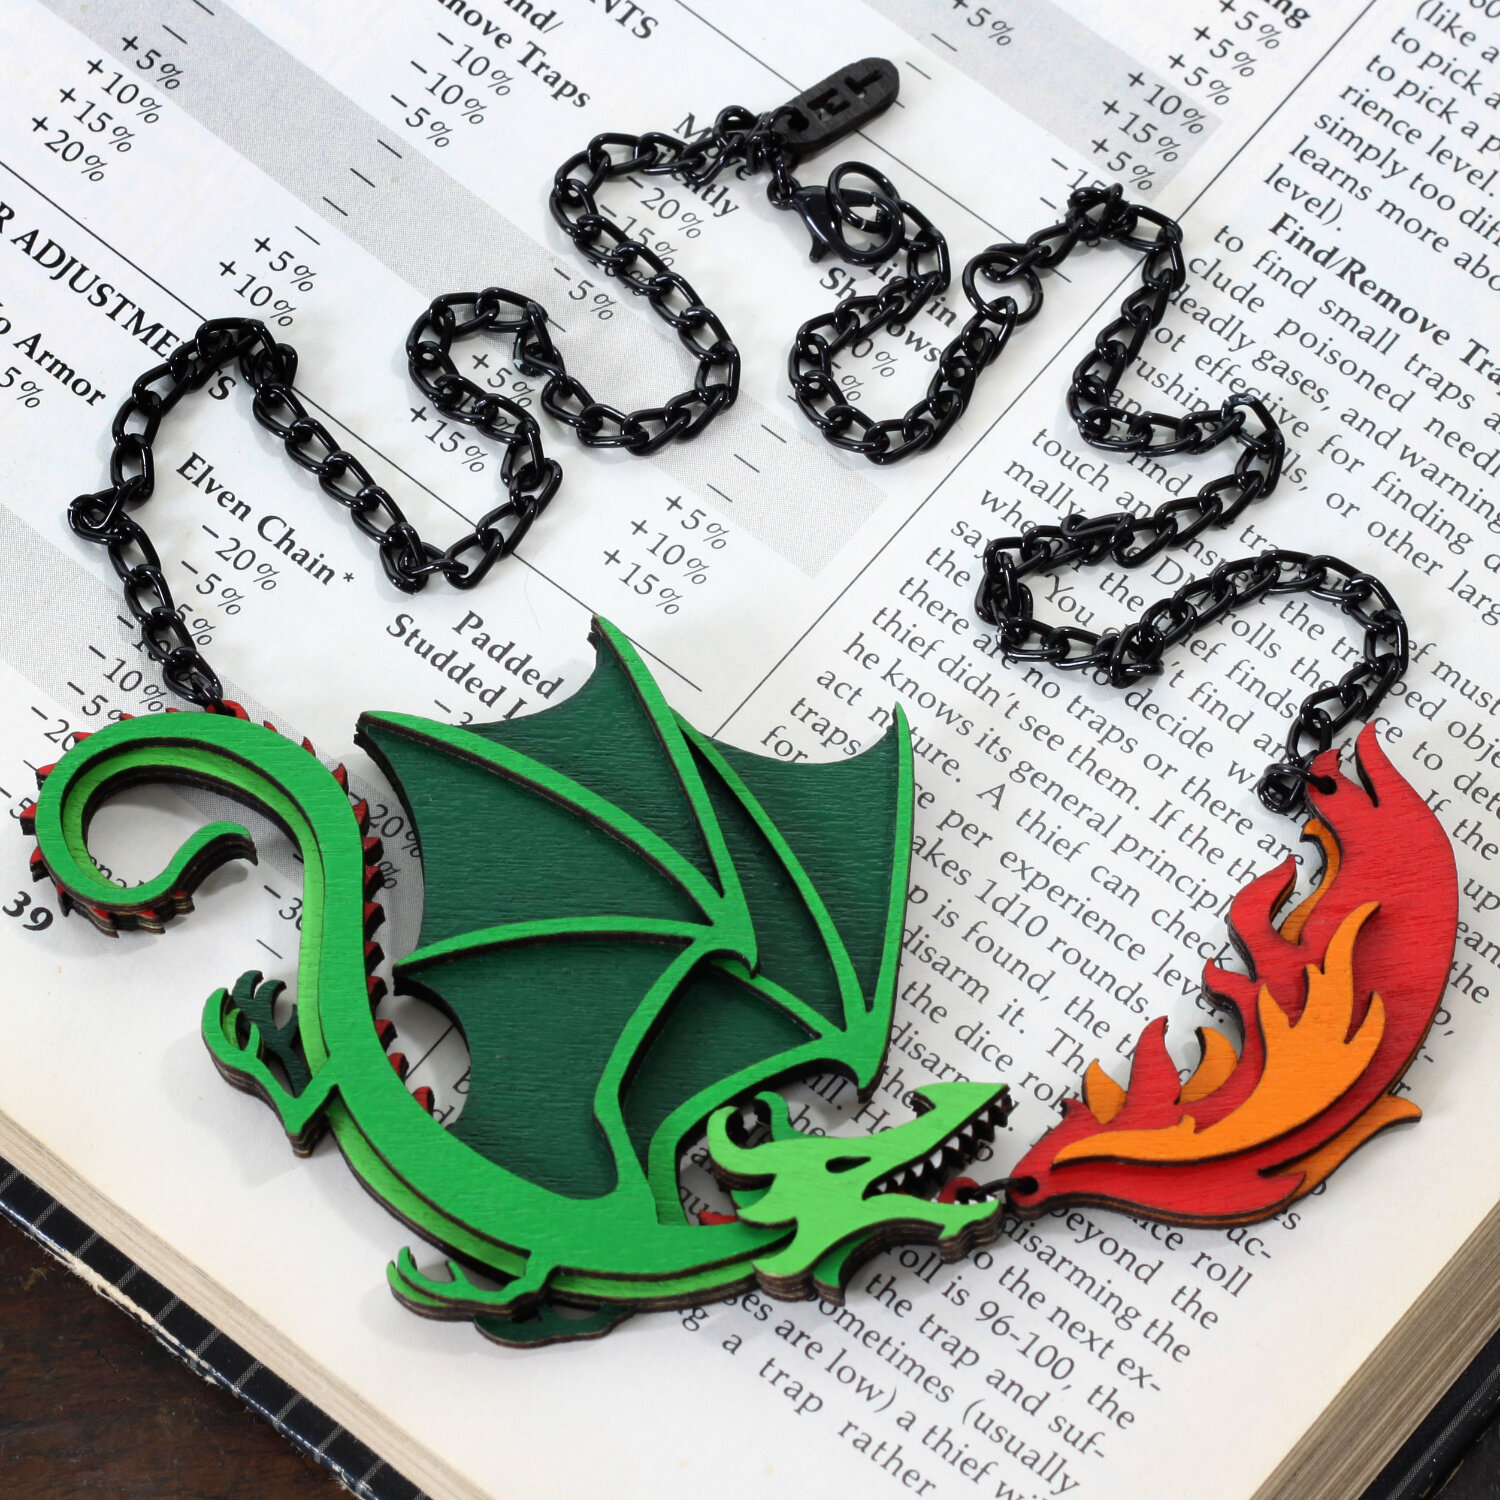 Dragon Flame Necklace Book.jpg